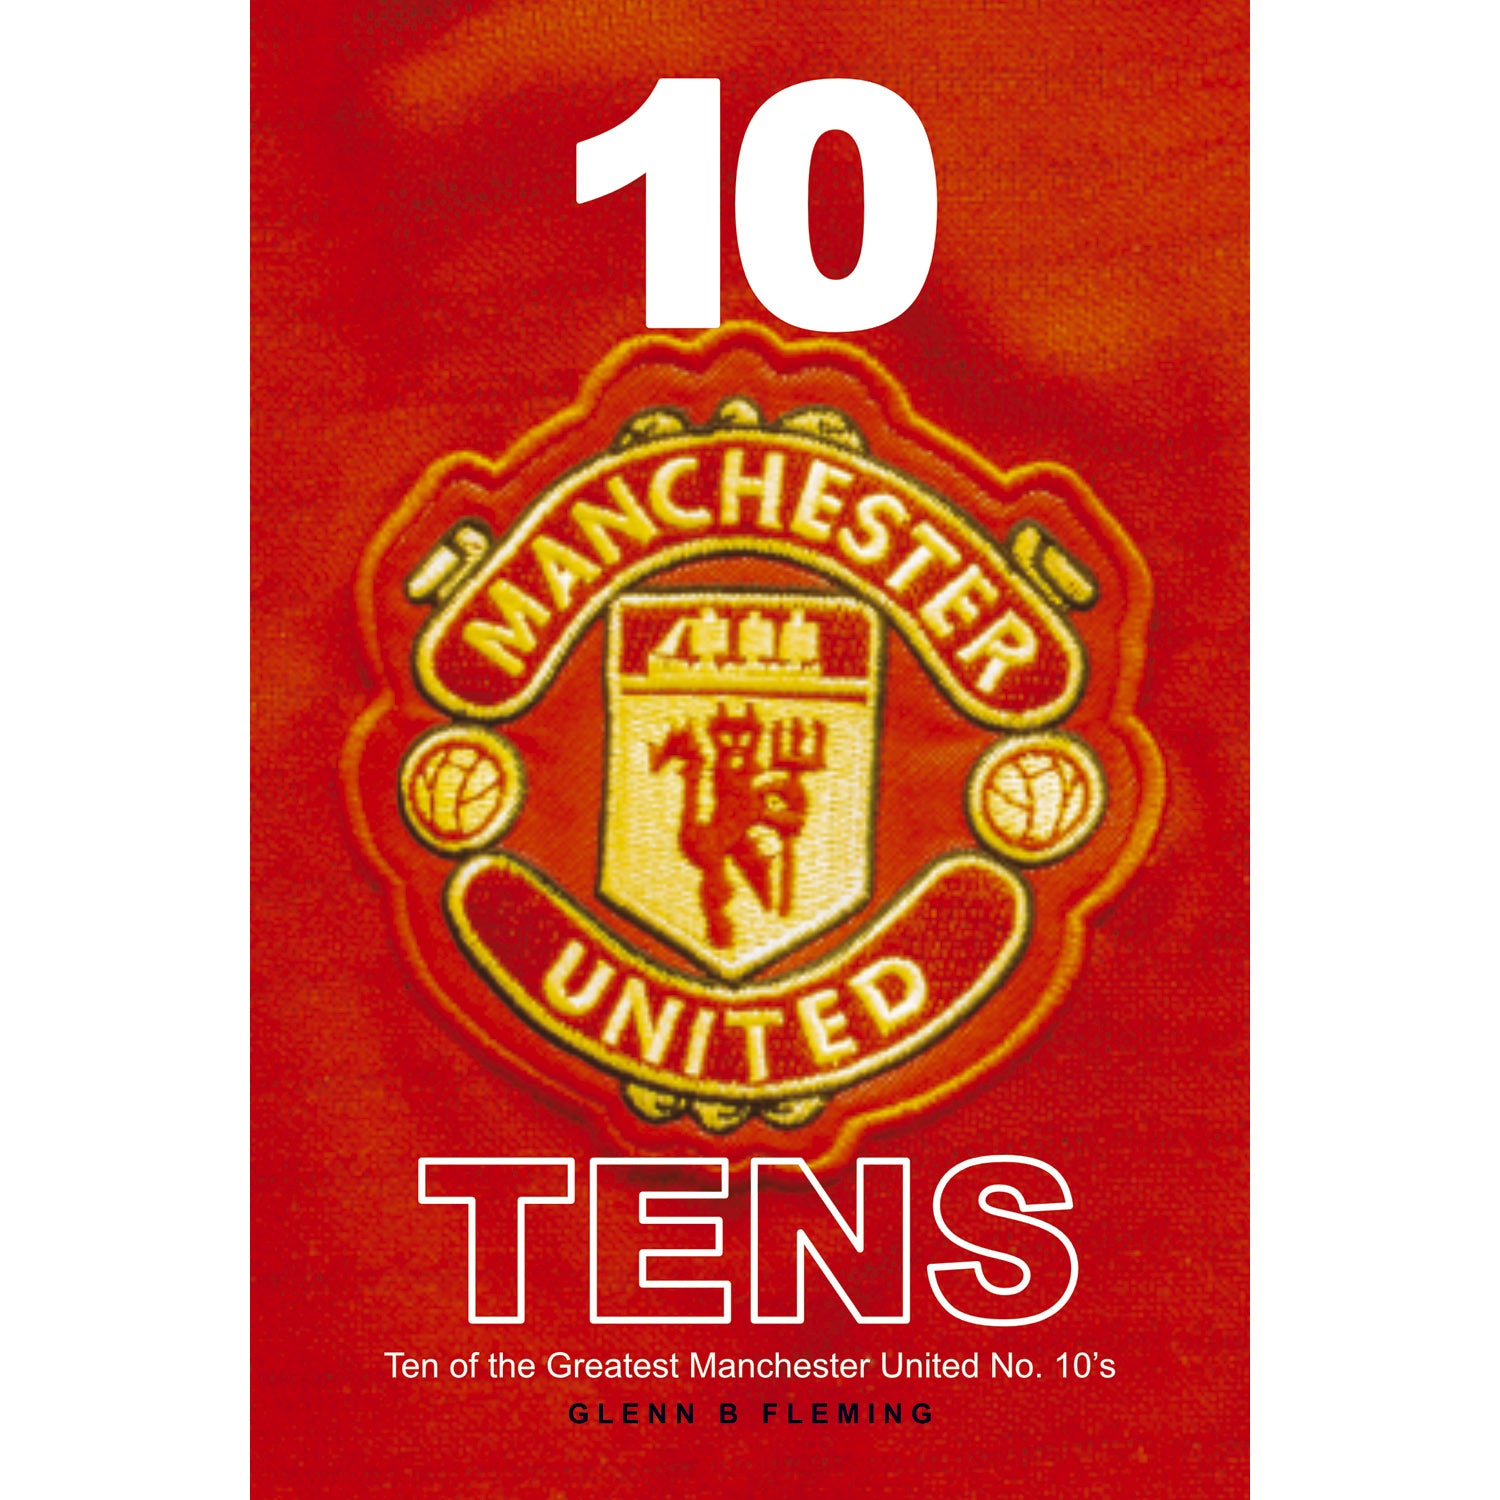 10 Manchester United Tens – Ten of the Greatest Man United No. 10s